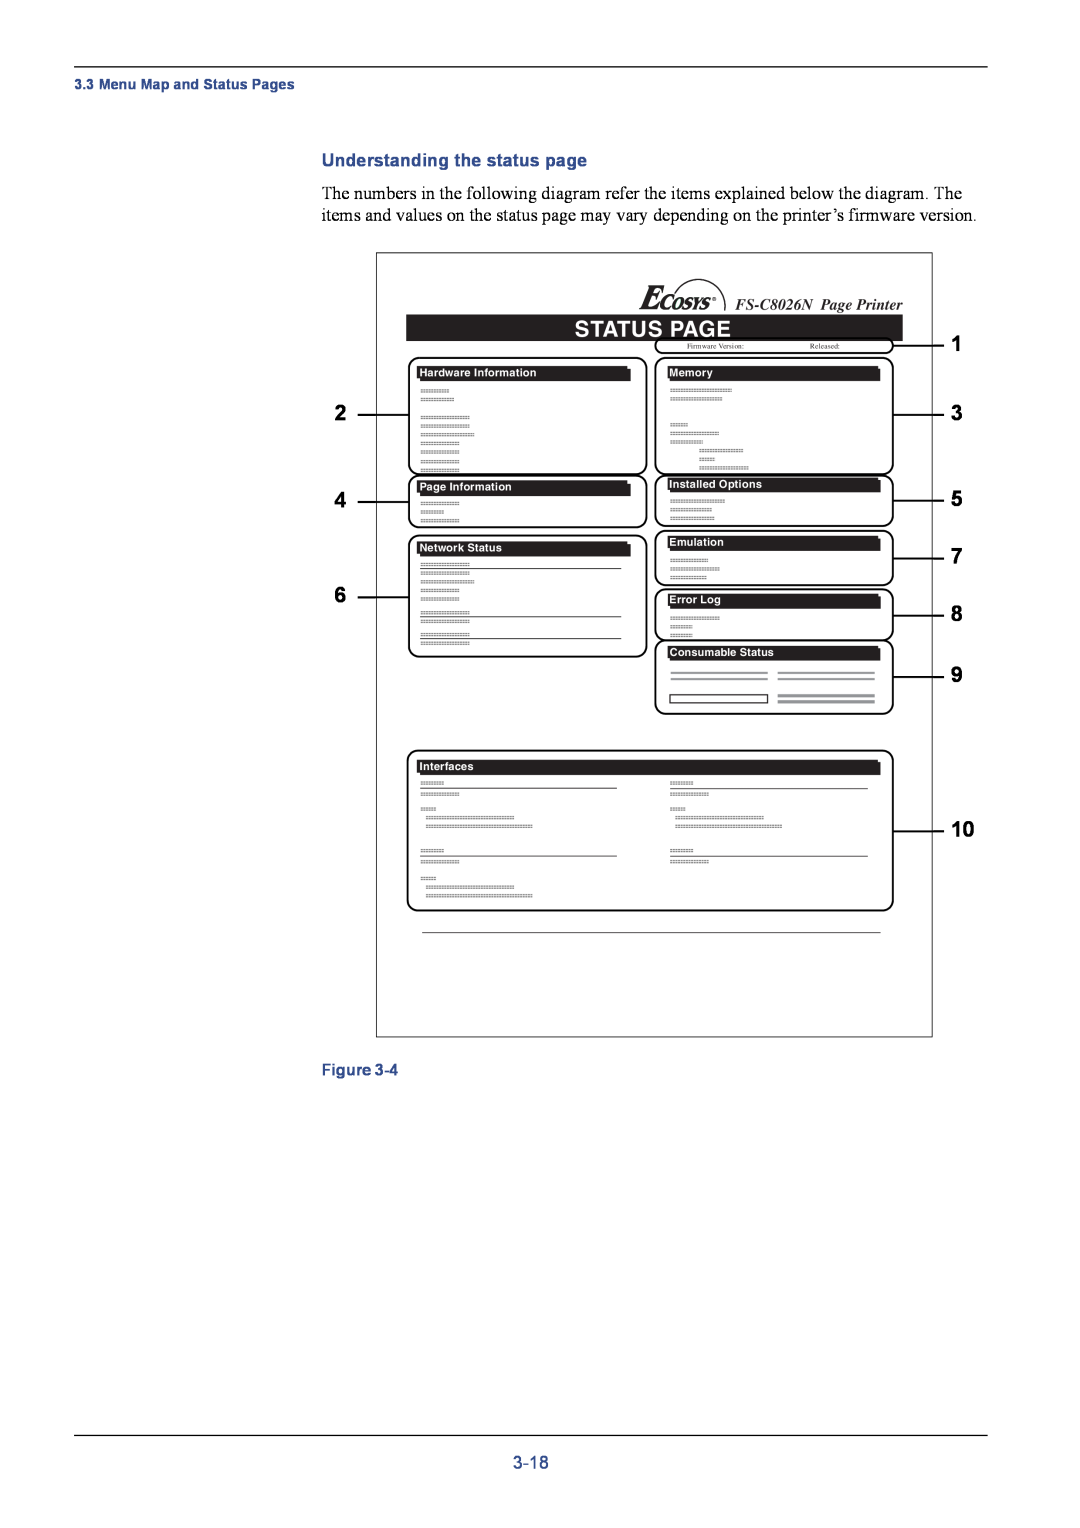 Kyocera Understanding the status page, 3-18, FS-C8026N Page Printer, Menu Map and Status Pages, Memory, Emulation 